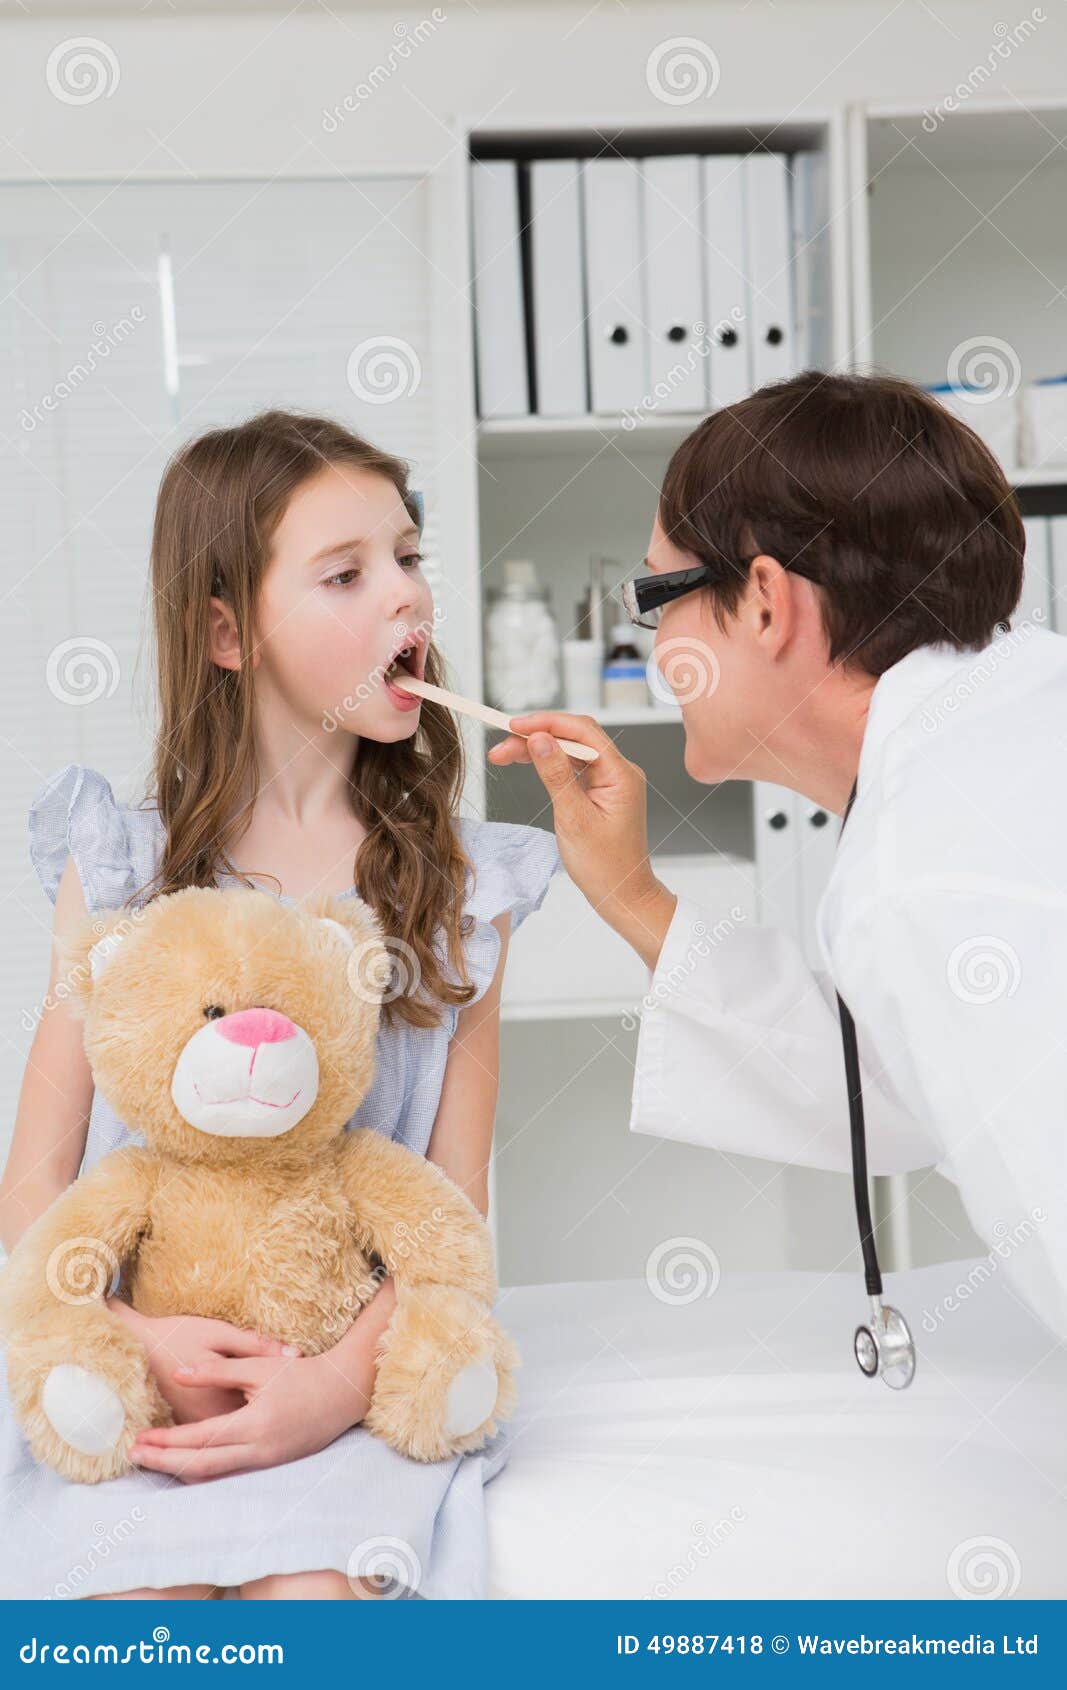 doctor examining little girl mouth